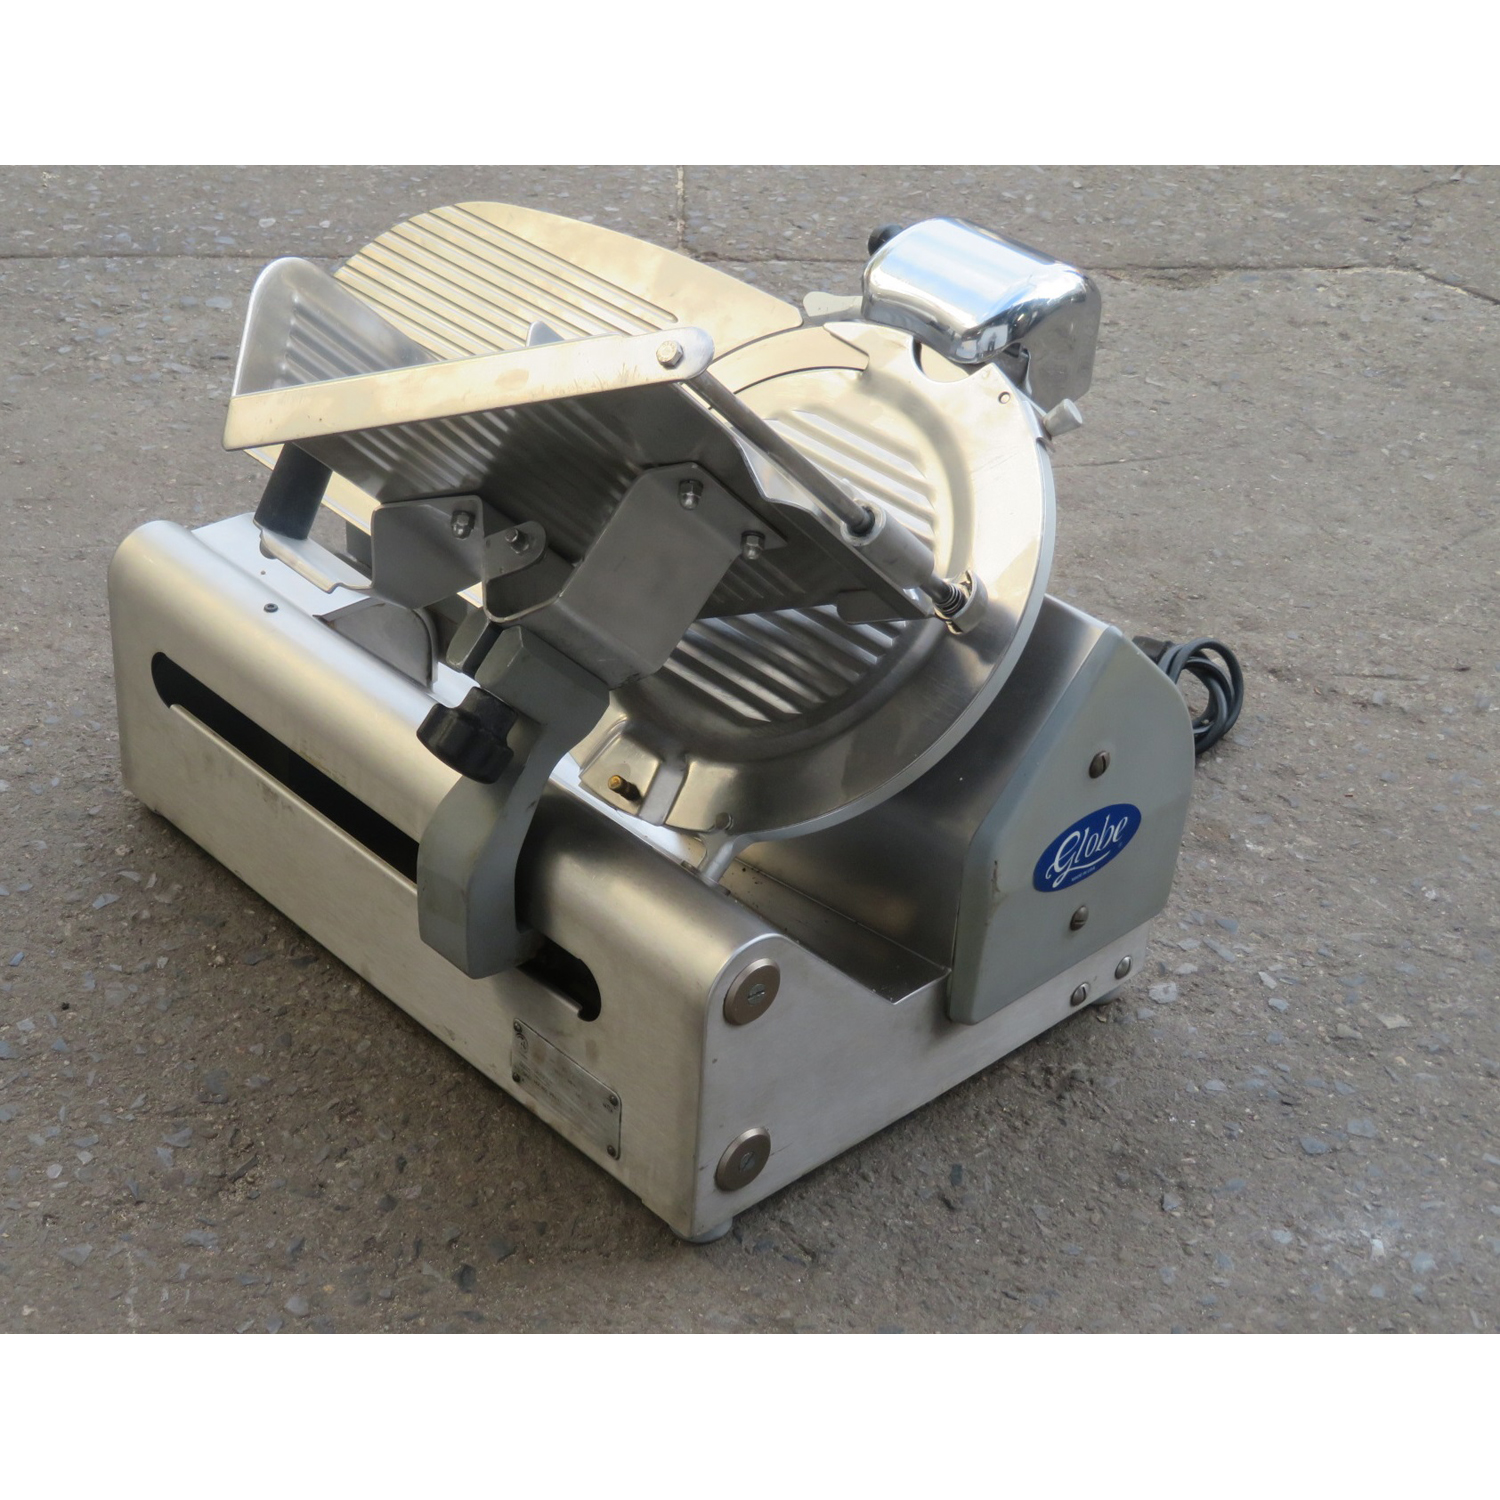 Globe 3600 Meat Slicer, Used Great Condition image 1